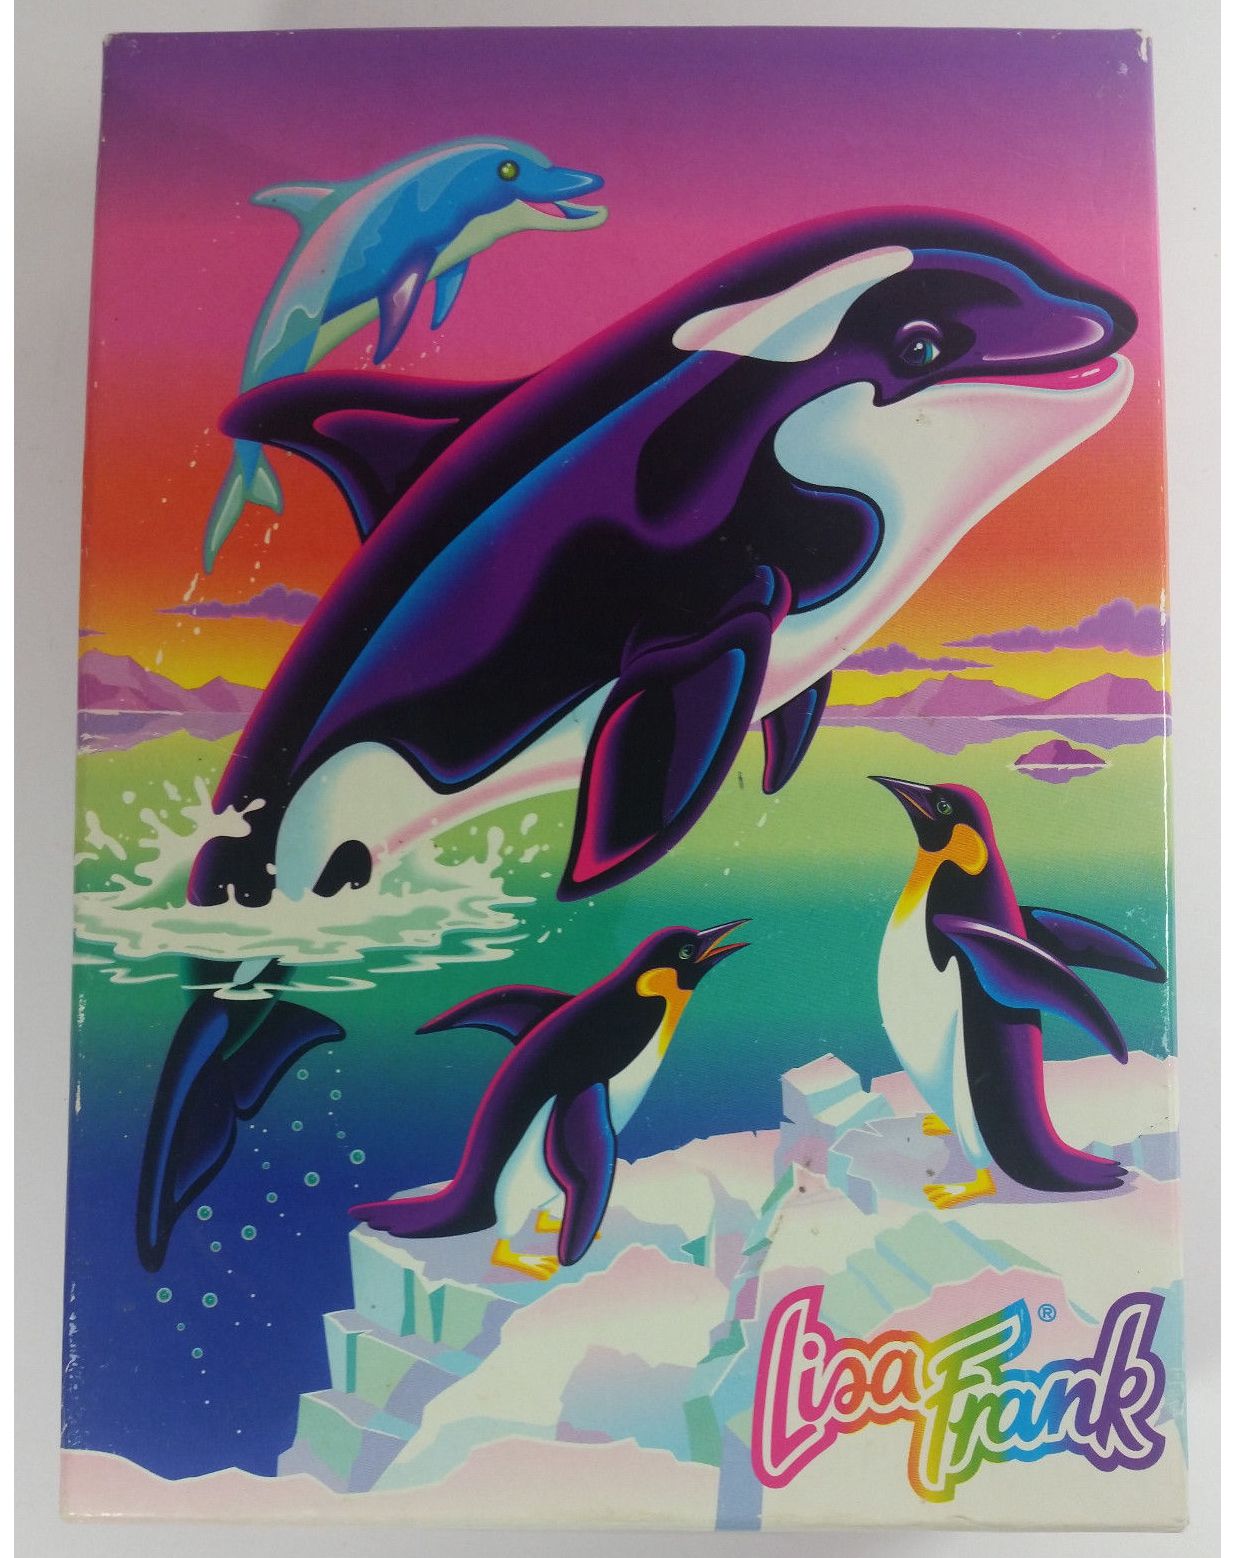 <p>For children of the late '80s and early '90s, nothing was safe from the Lisa Frank empire. Everything from folders and notebooks to erasers and pencil boxes came festooned in whimsical neon and rainbow colors, often featuring unicorns, big-eyed cheetahs, puppies, and kittens. Today, Lisa Frank's designs are <a href="https://www.fastcompany.com/40493102/the-second-coming-of-lisa-frank">licensed to other companies</a>, and you can still find stickers, puzzles, bedding, and assorted other products <a href="https://www.amazon.com/stores/LisaFrank/node/3033929011/ref=as_li_ss_tl?ie=UTF8&linkCode=ll2&tag=msnshop-20&linkId=b4a6a4bef4957c2f021ac2311d07aeed&language=en_US">on Amazon</a>.</p>